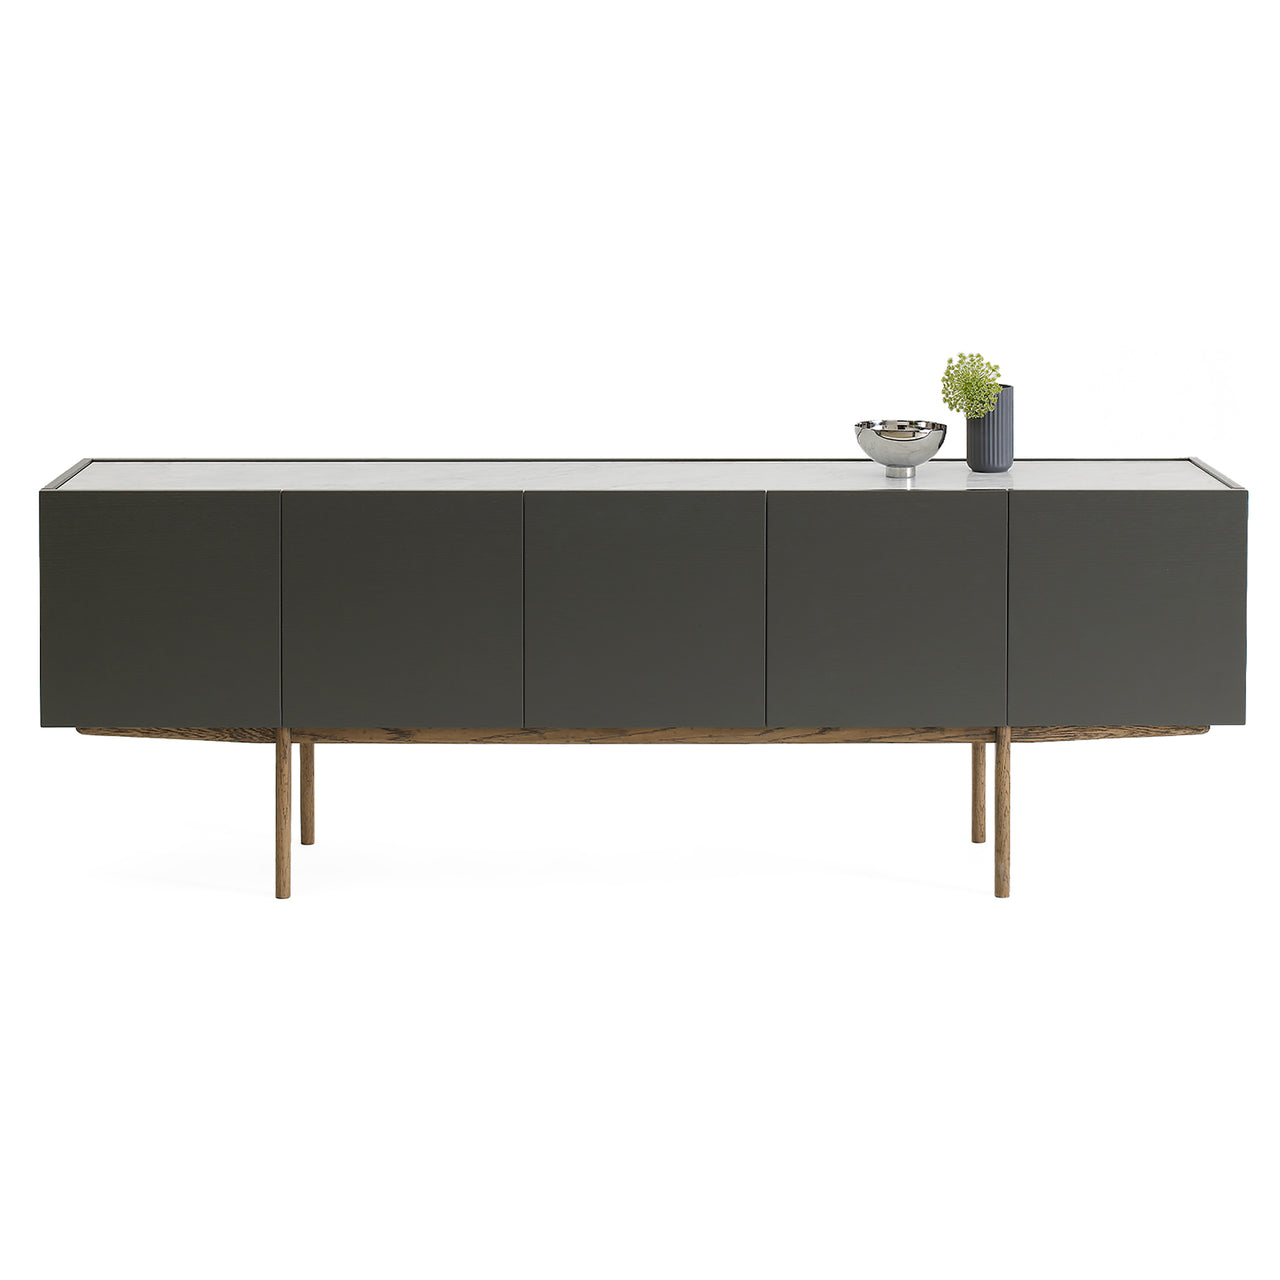 Luc Deluxe 200: Marble Top + Carrara Marble + Taupe + Dark Smoked Oak